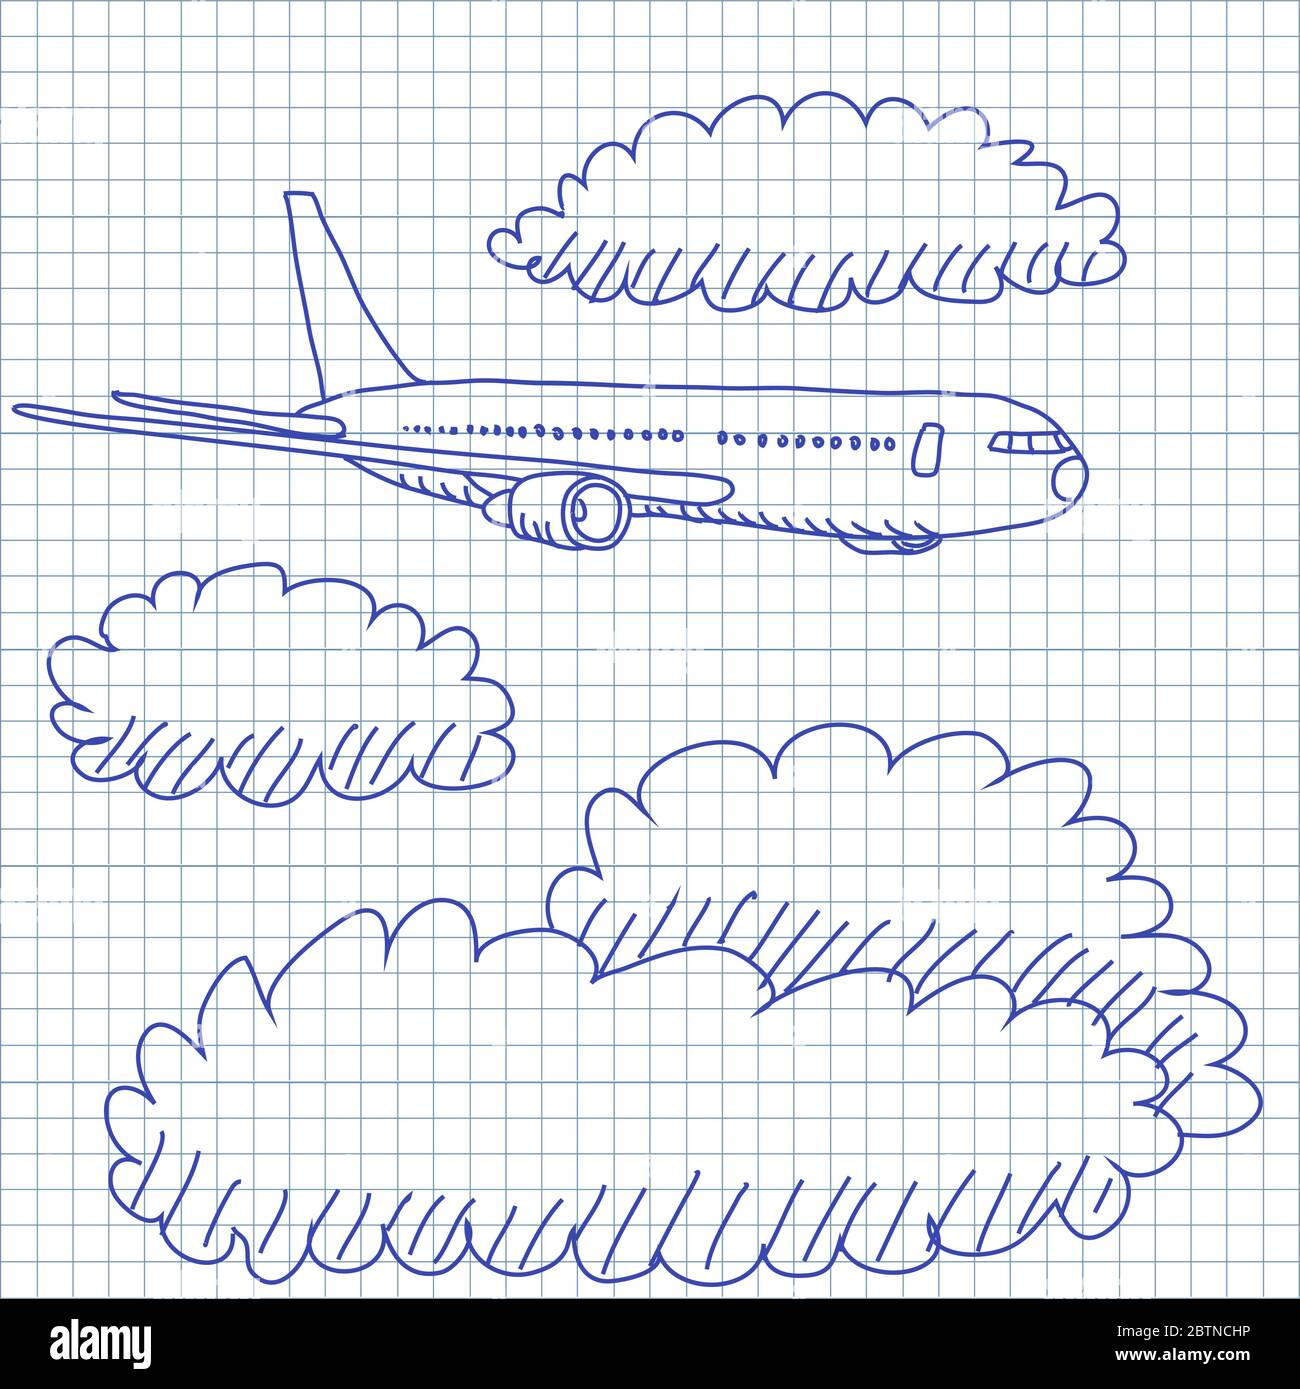 Doodle Hand-drawn vector drawing of an Airplane in the clouds. Concept picture for Air Travel. Pencil sketch on a squared paper on white. Stock Vector